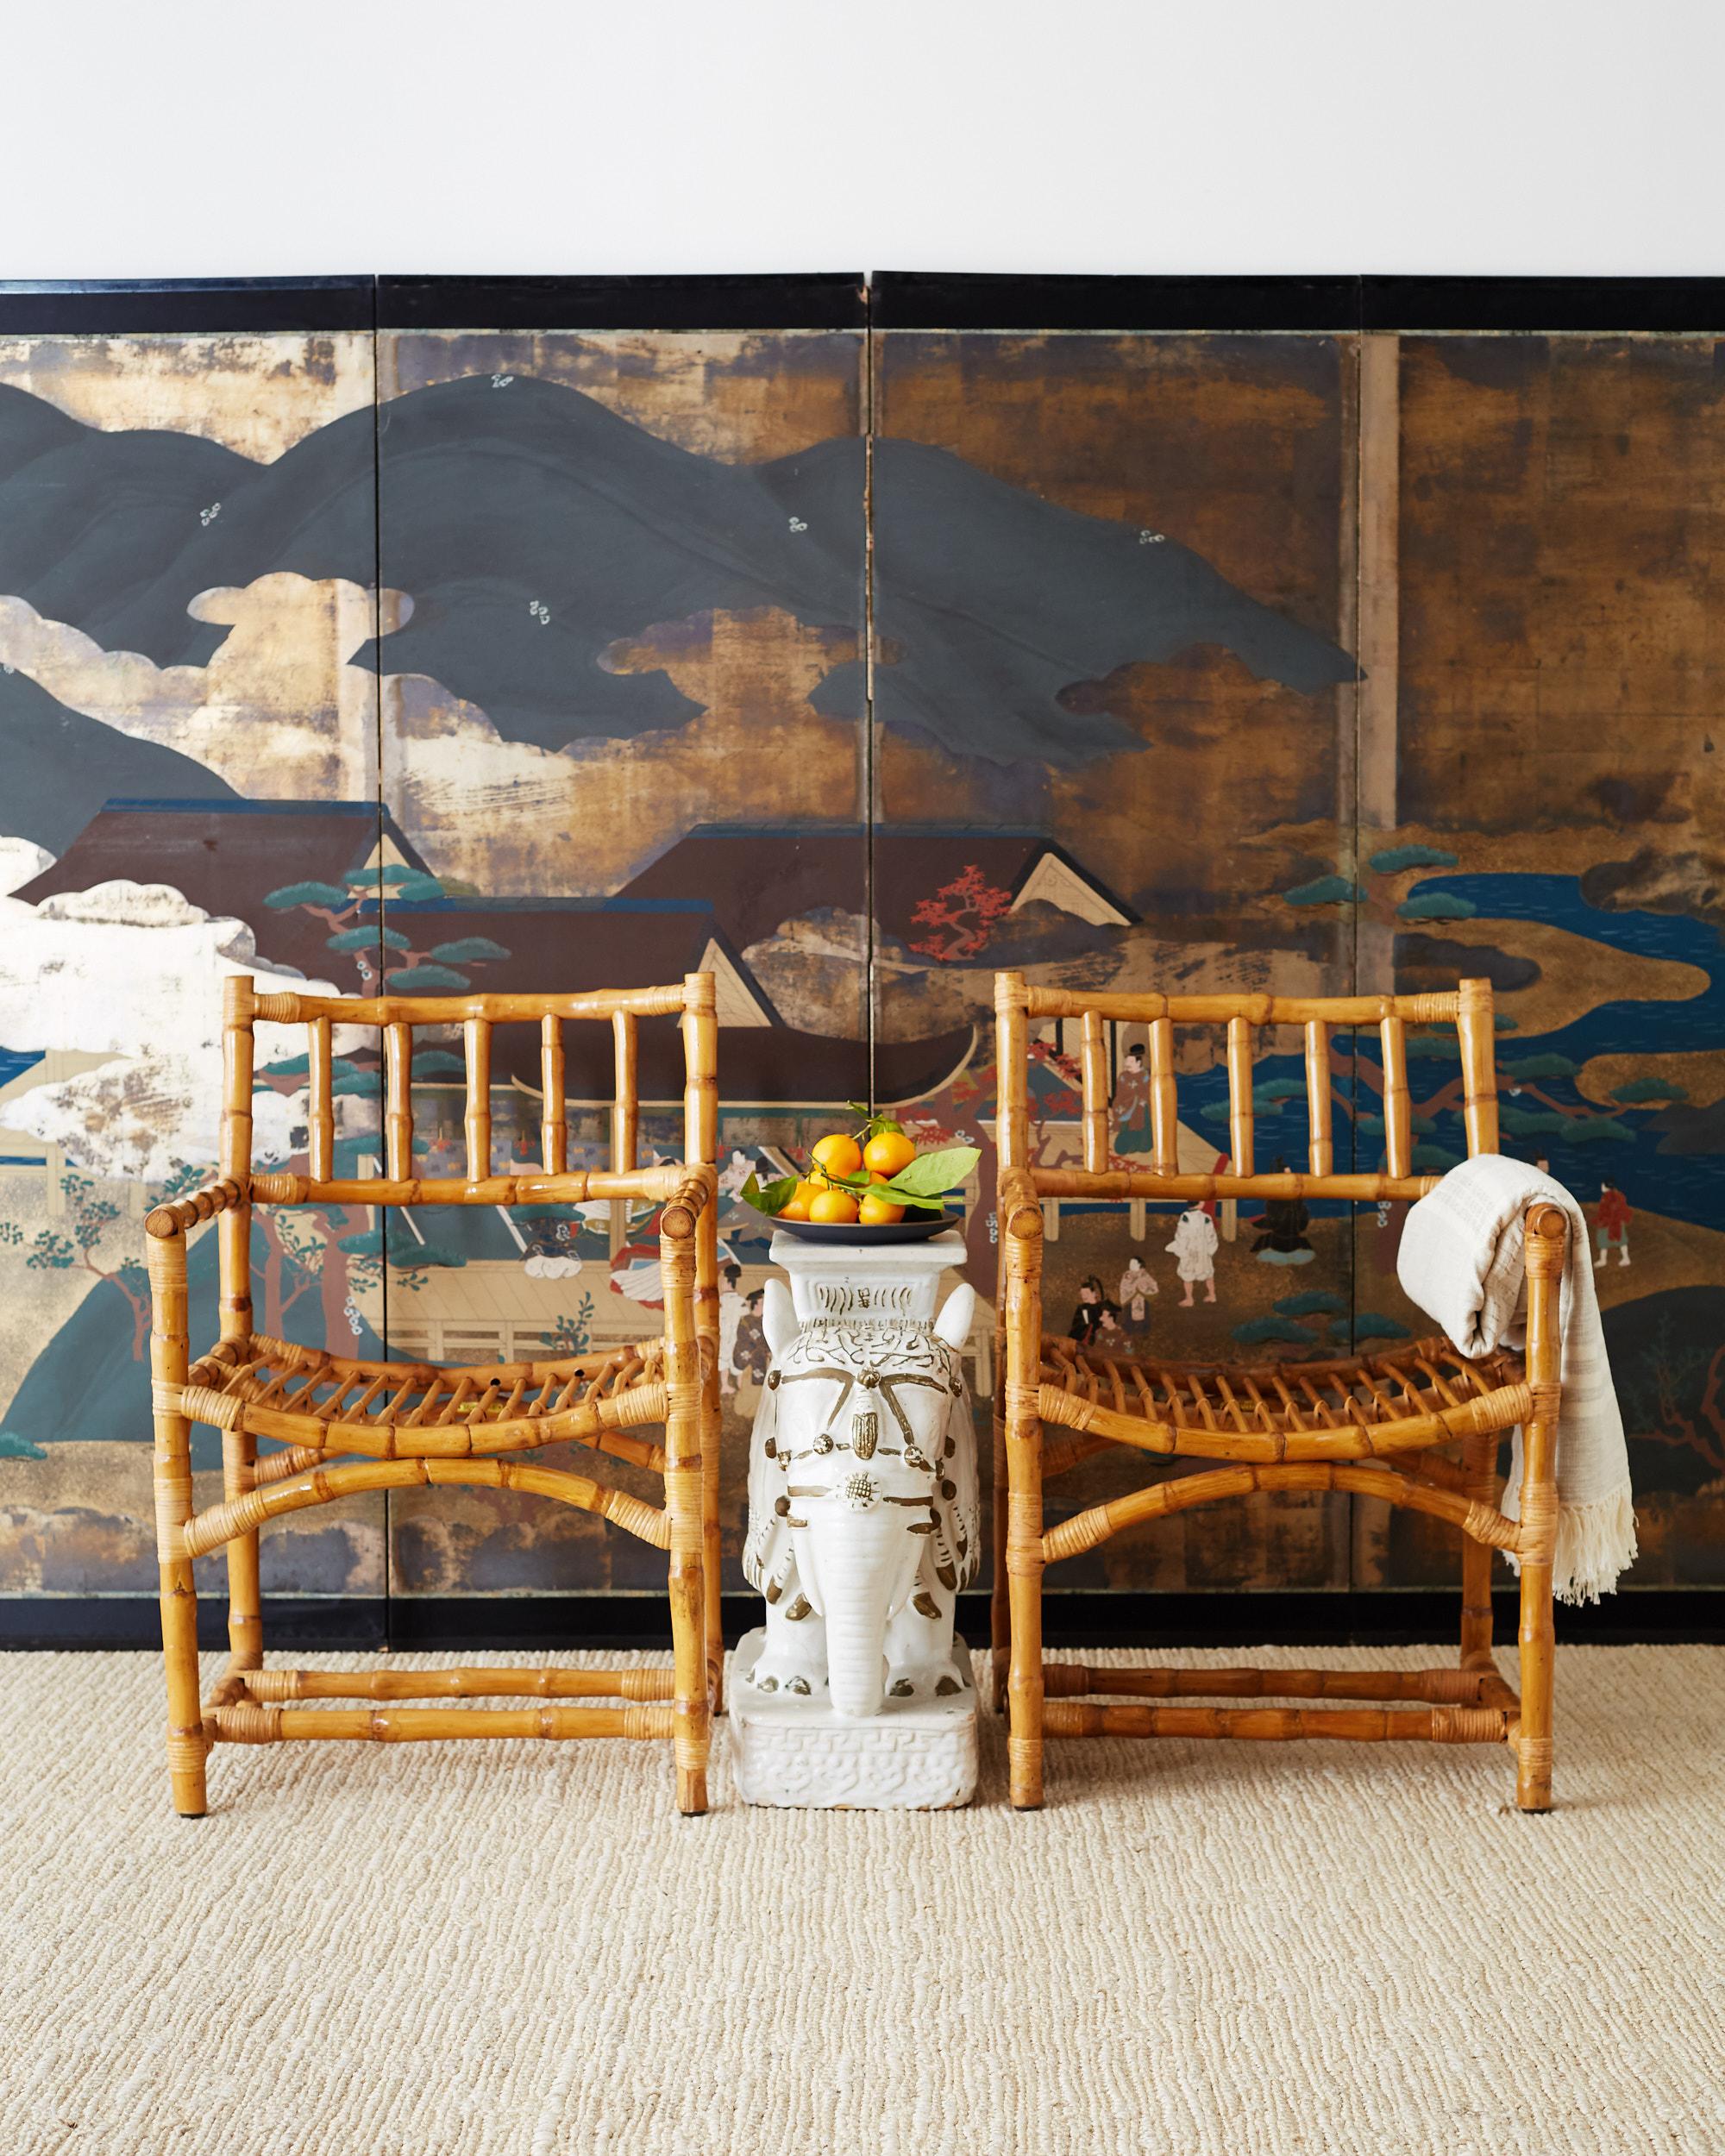 Edo period style Japanese six-panel byobu screen depicting aristocrats in a Heian period setting. Painted in the Tosa school style with large opaque mountains and river landscape over a gold leaf background. Figures amid pagodas and trees with